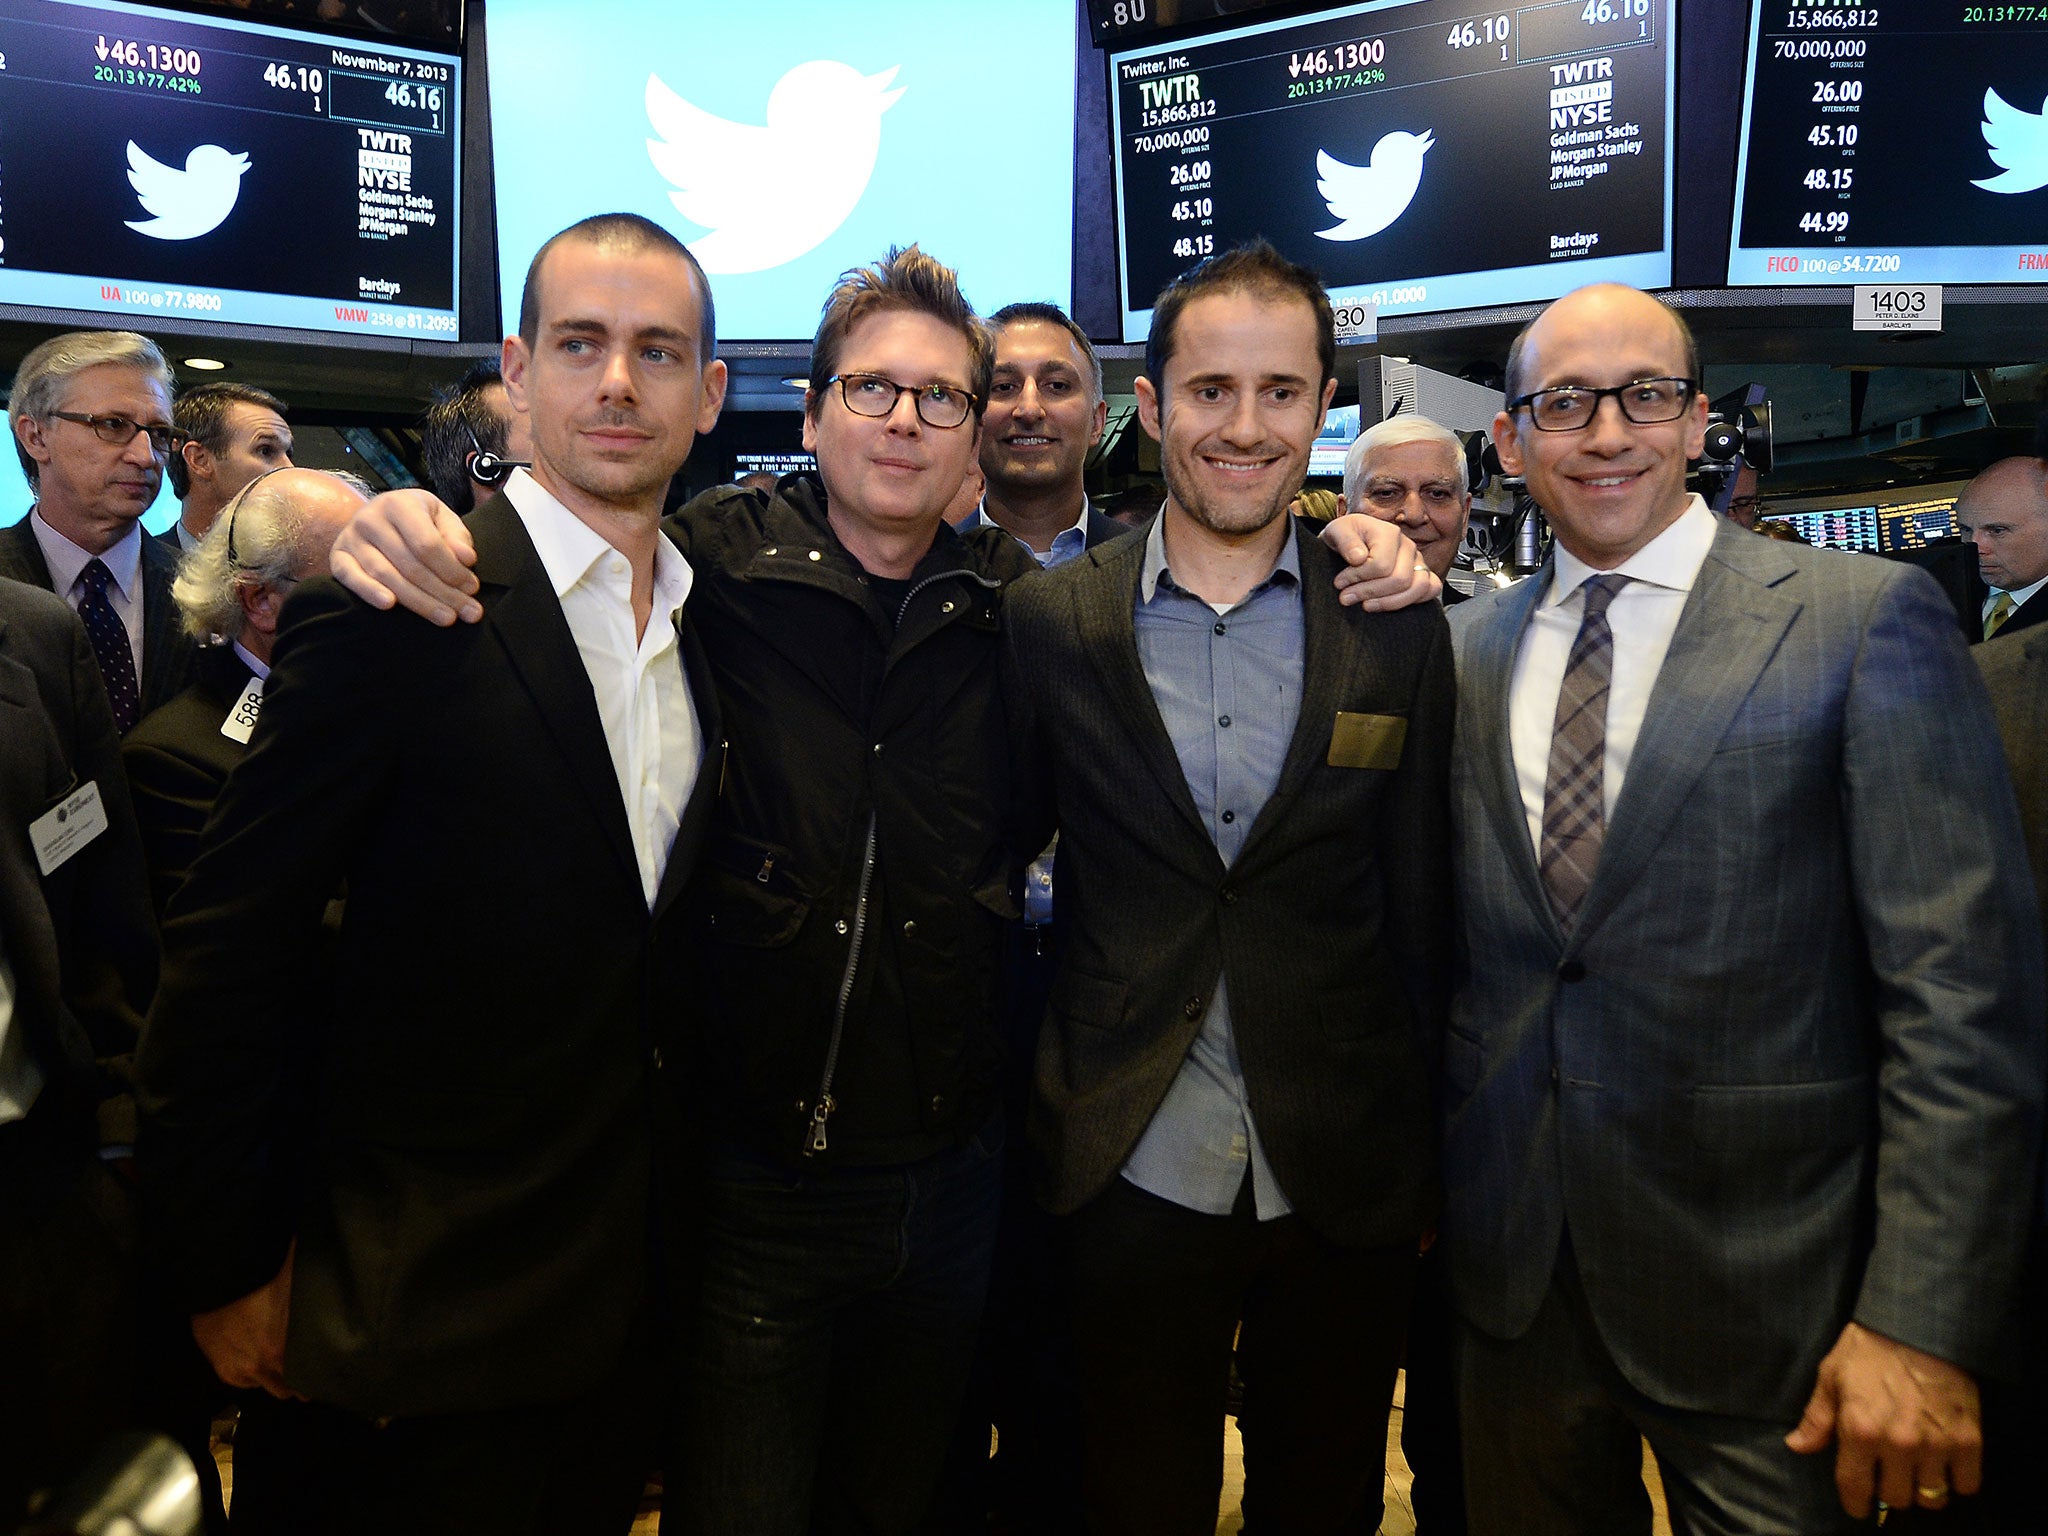 Twitter co-founders Jack Dorsey, Christopher Isaac 'Biz' Stone, Evan Williams and Twitter CEO Richard 'Dick' Costolo pose for a photo on the trading floor of the New York Stock Exchange (NYSE)